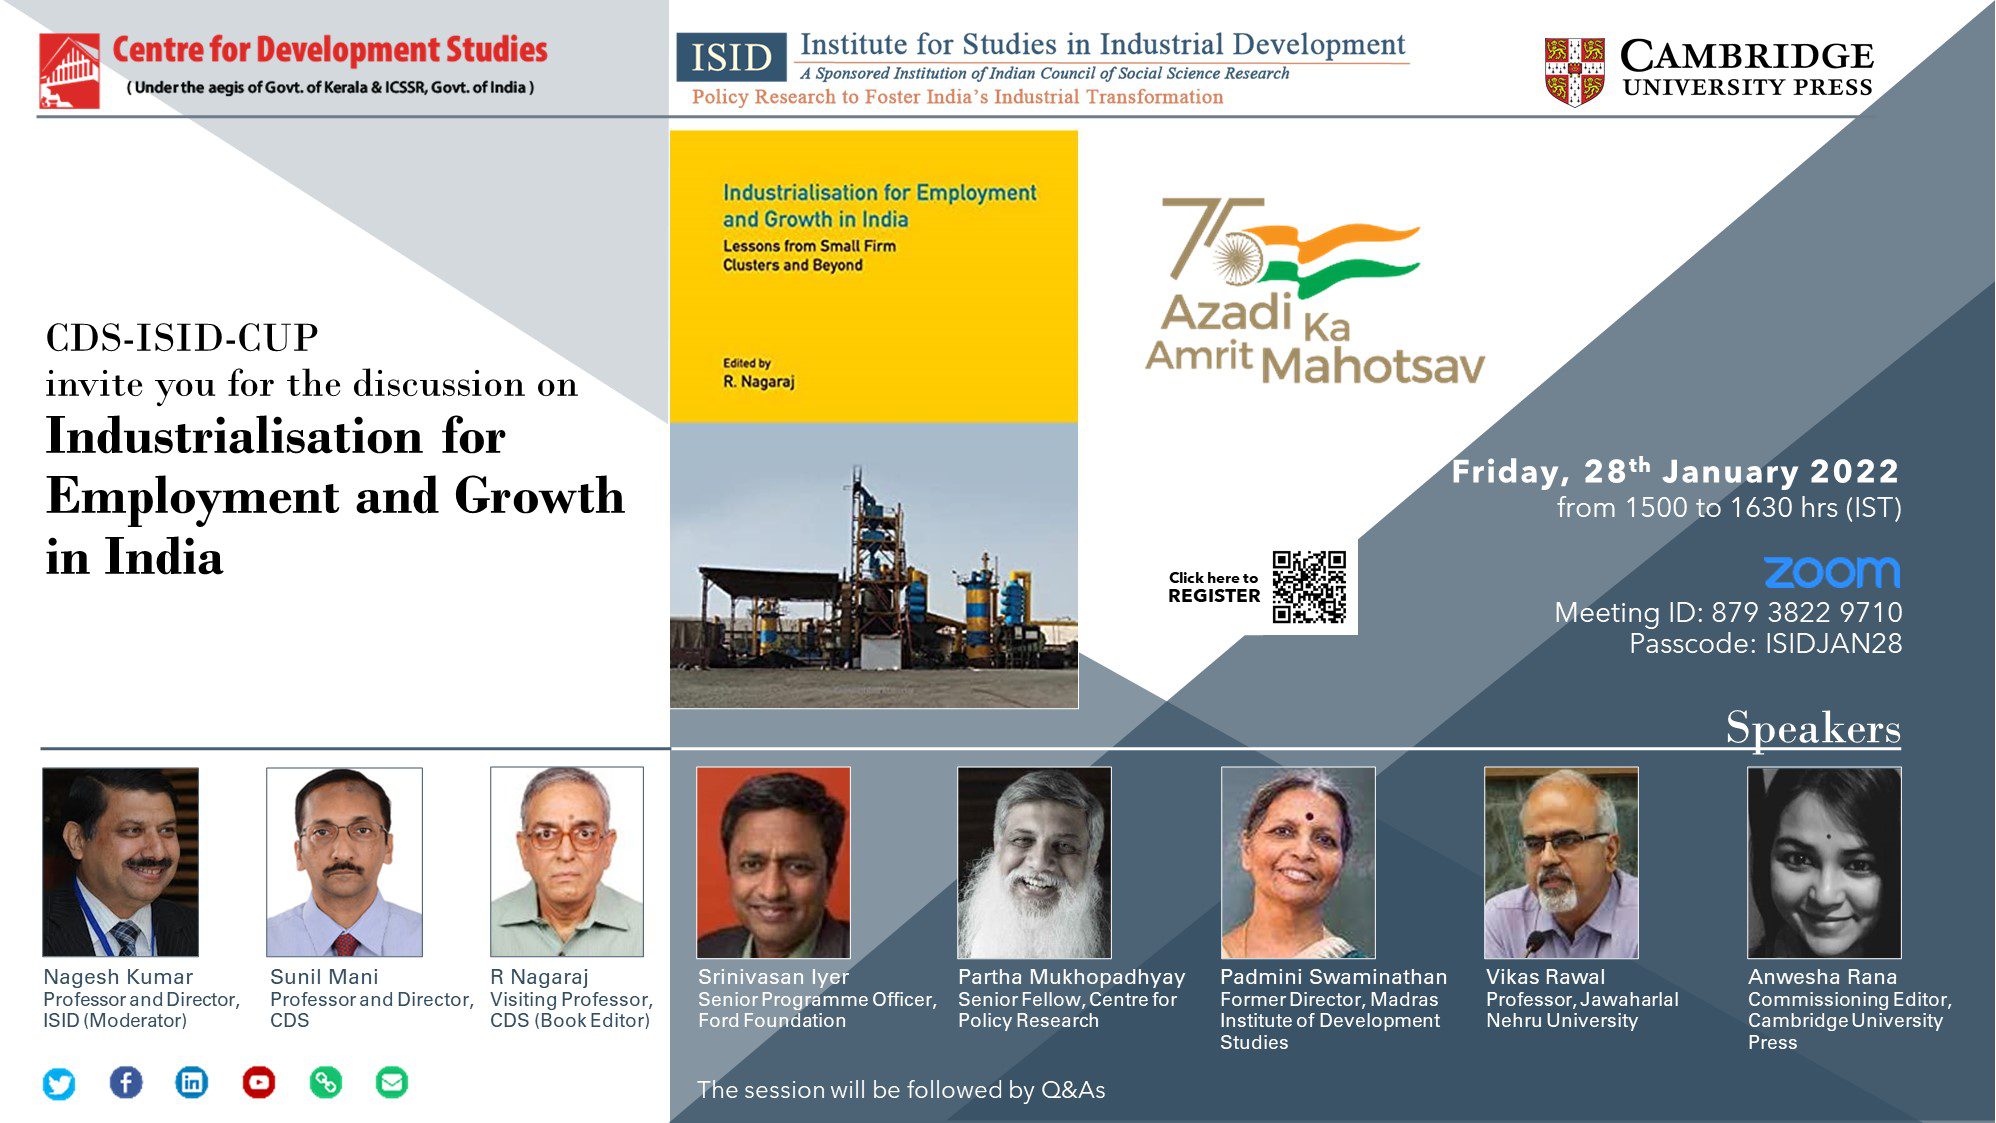 CDS-ISID-CUP discussion on Industrialisation for Employment and Growth in India